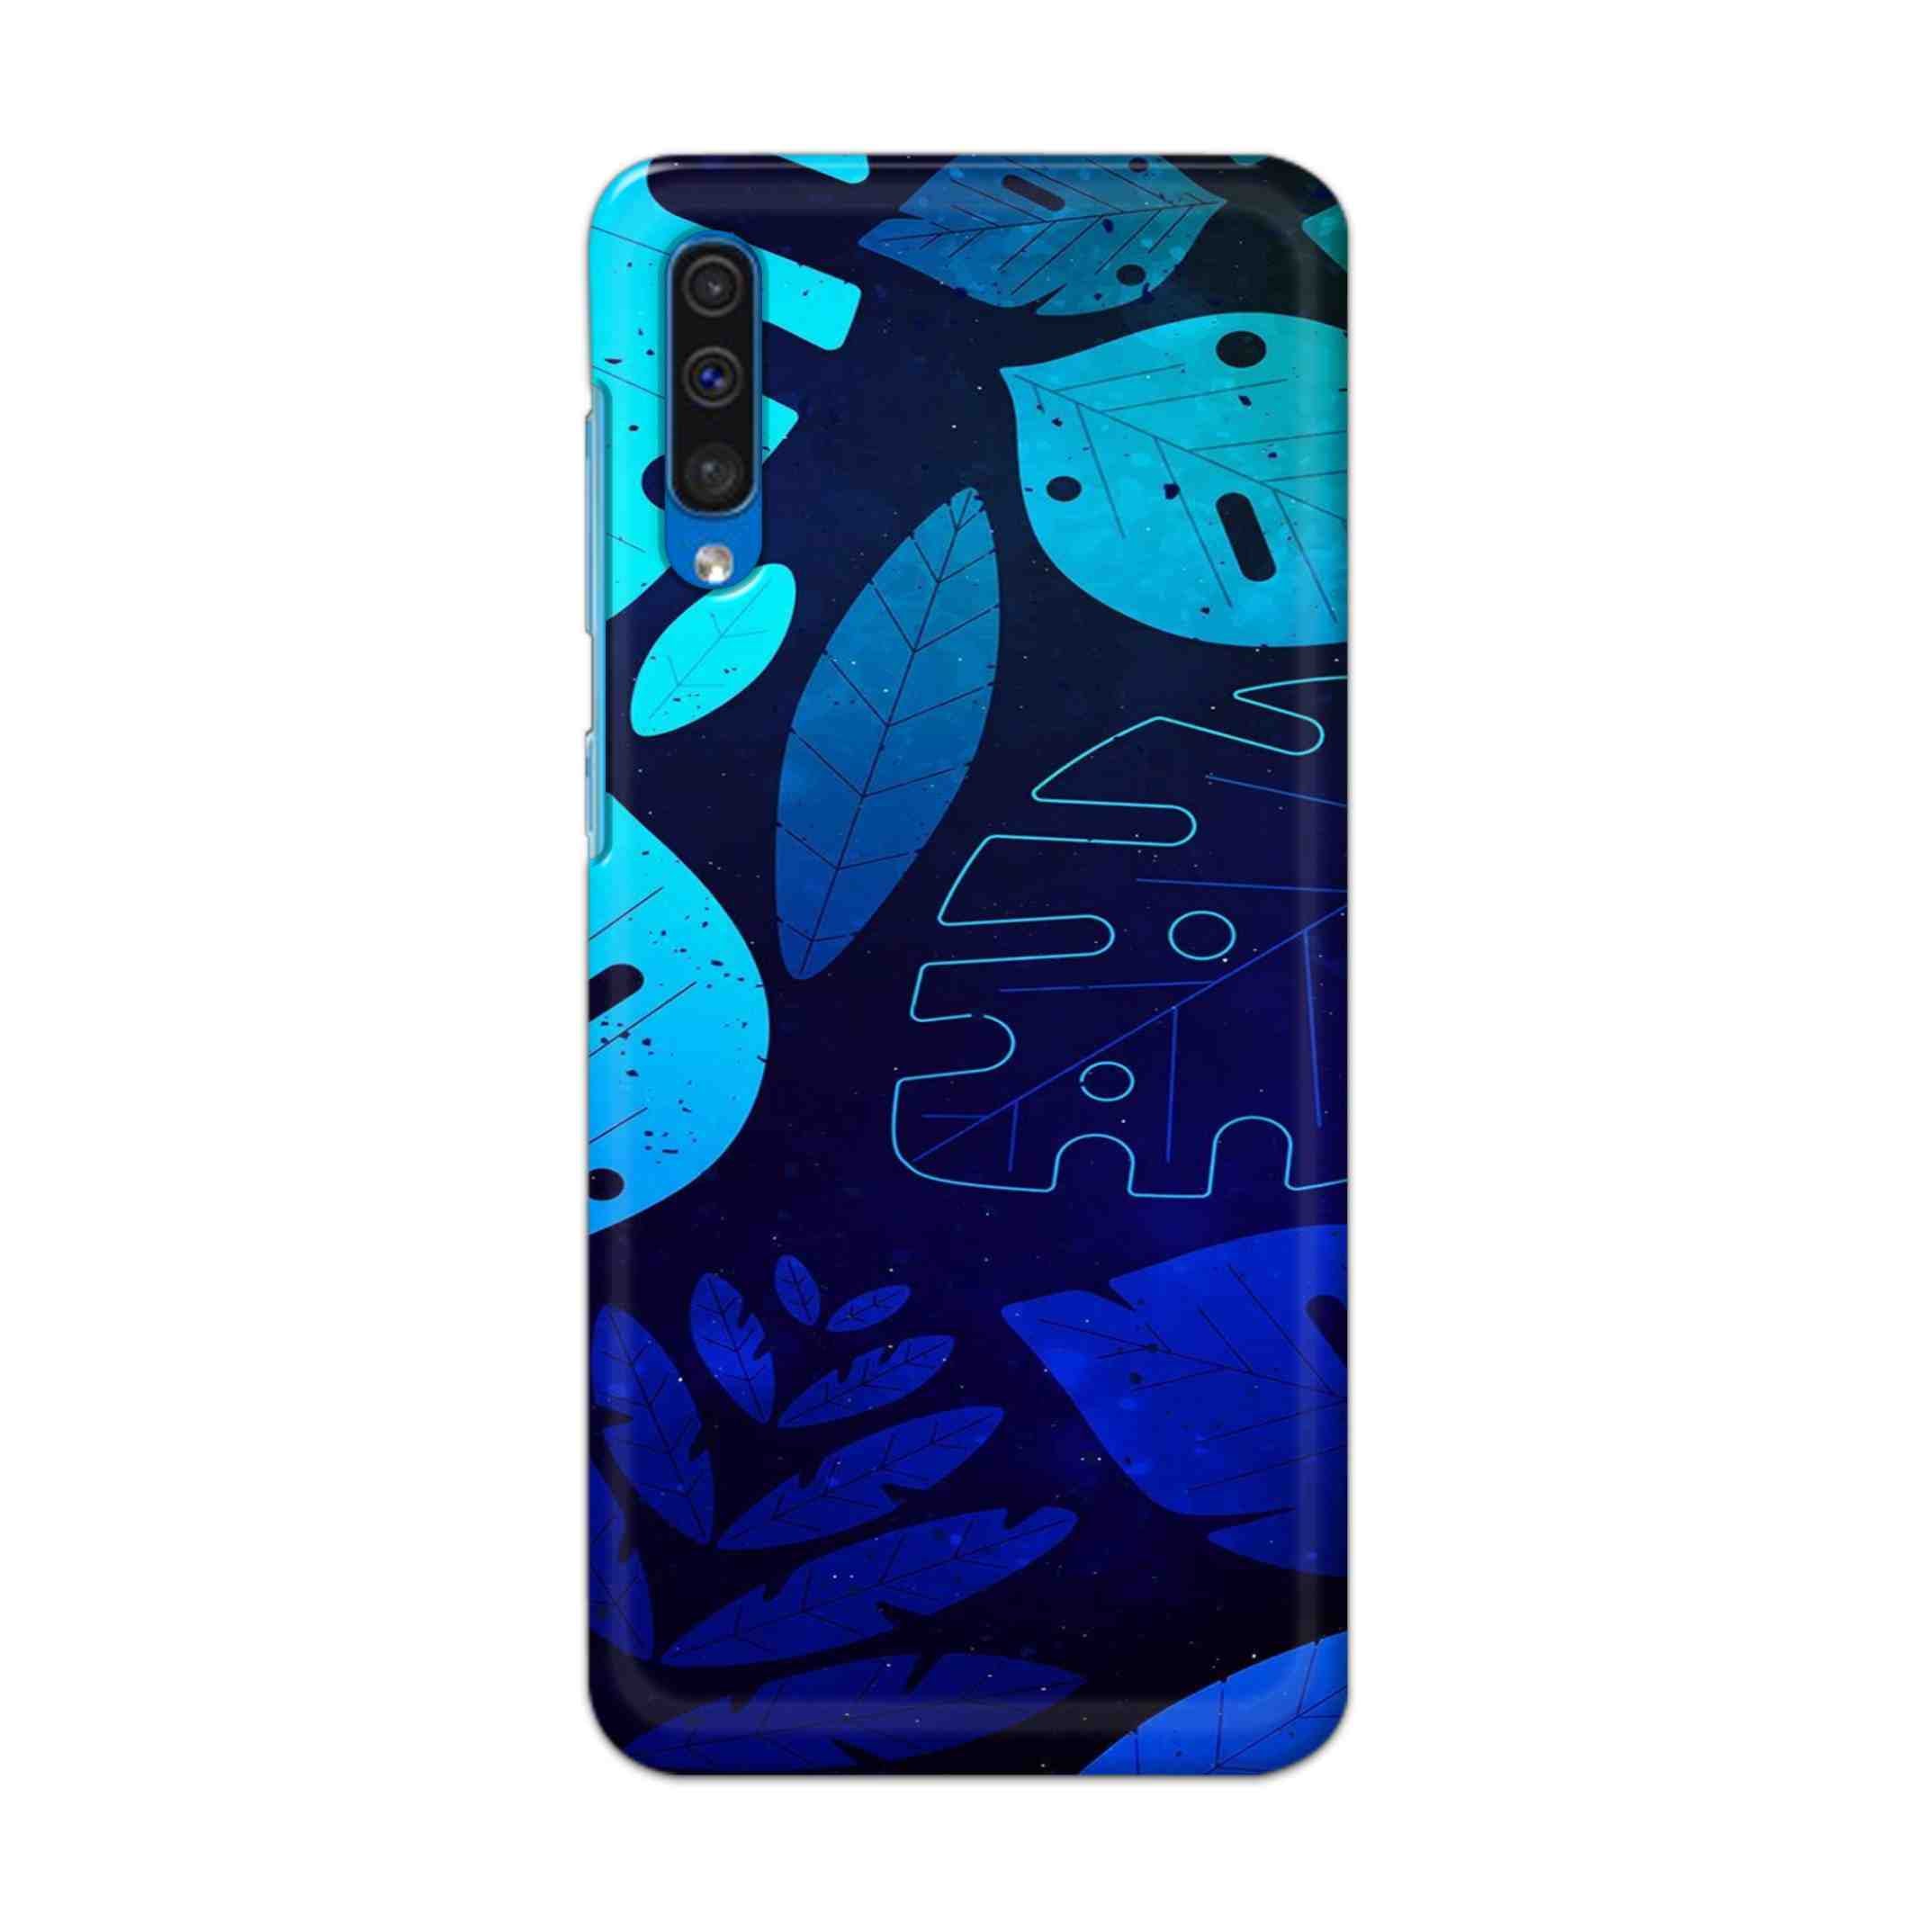 Buy Neon Leaf Hard Back Mobile Phone Case Cover For Samsung Galaxy A50 / A50s / A30s Online